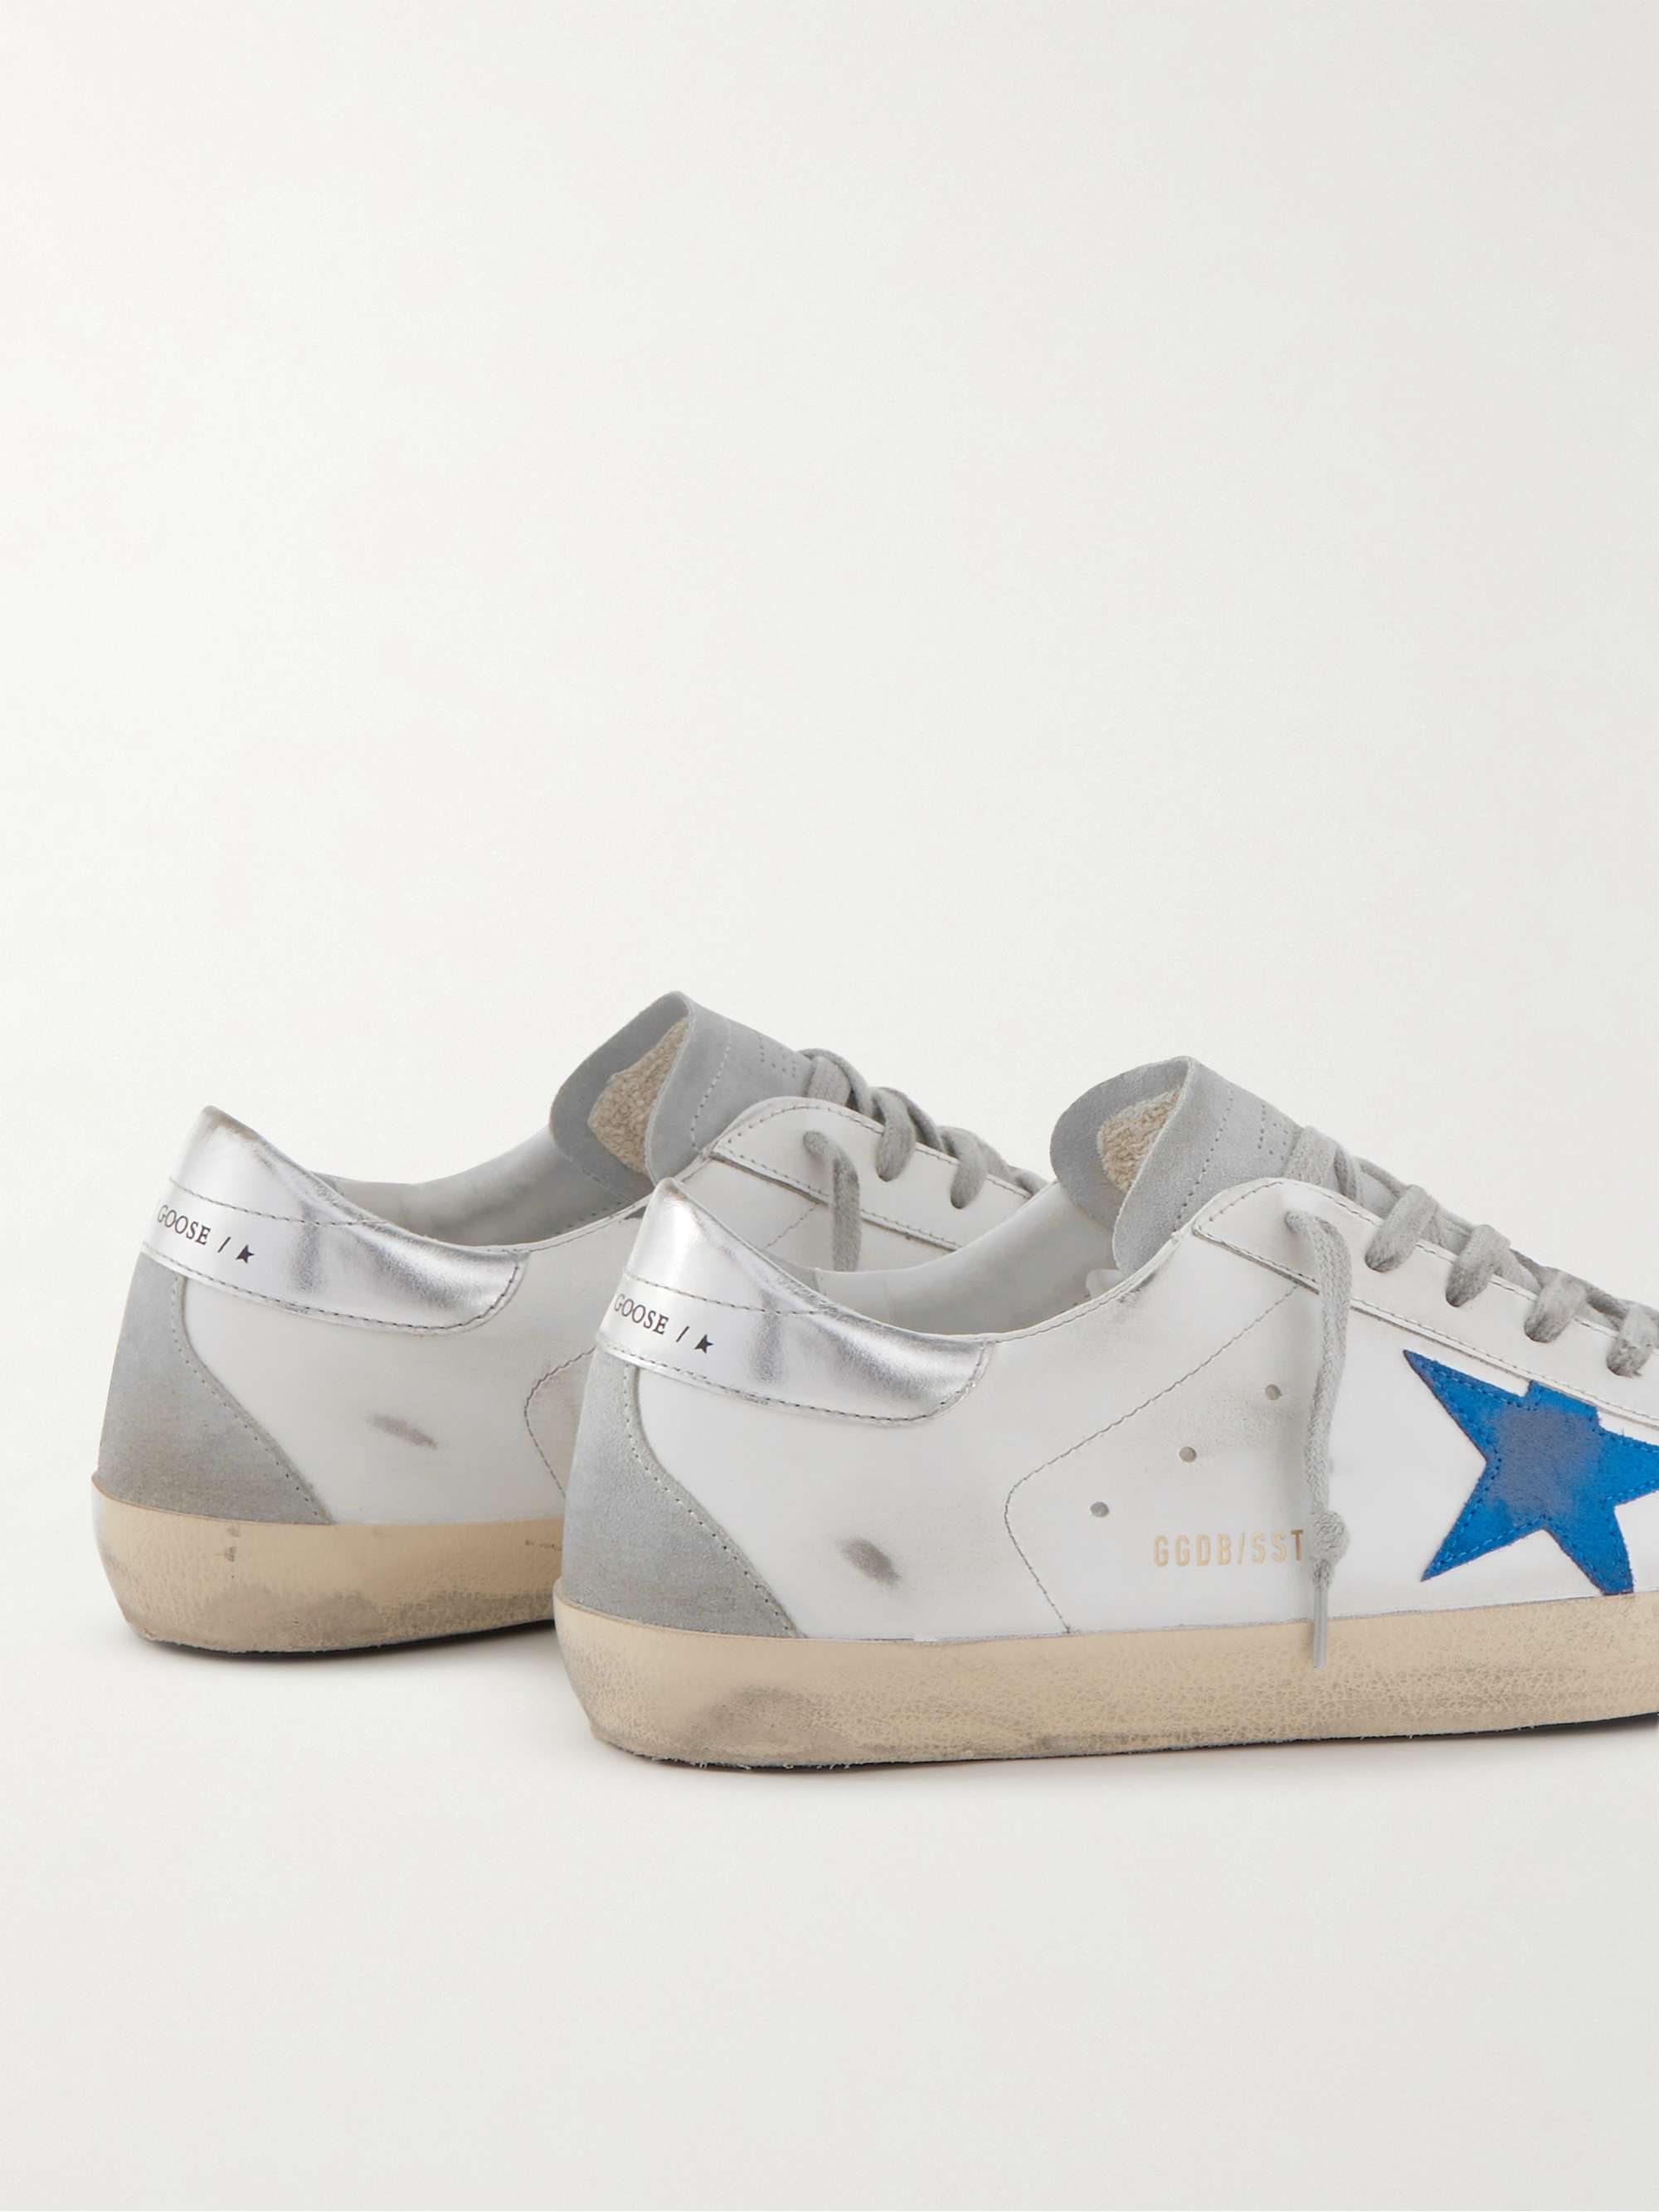 GOLDEN GOOSE Superstar Distressed Leather and Suede Sneakers